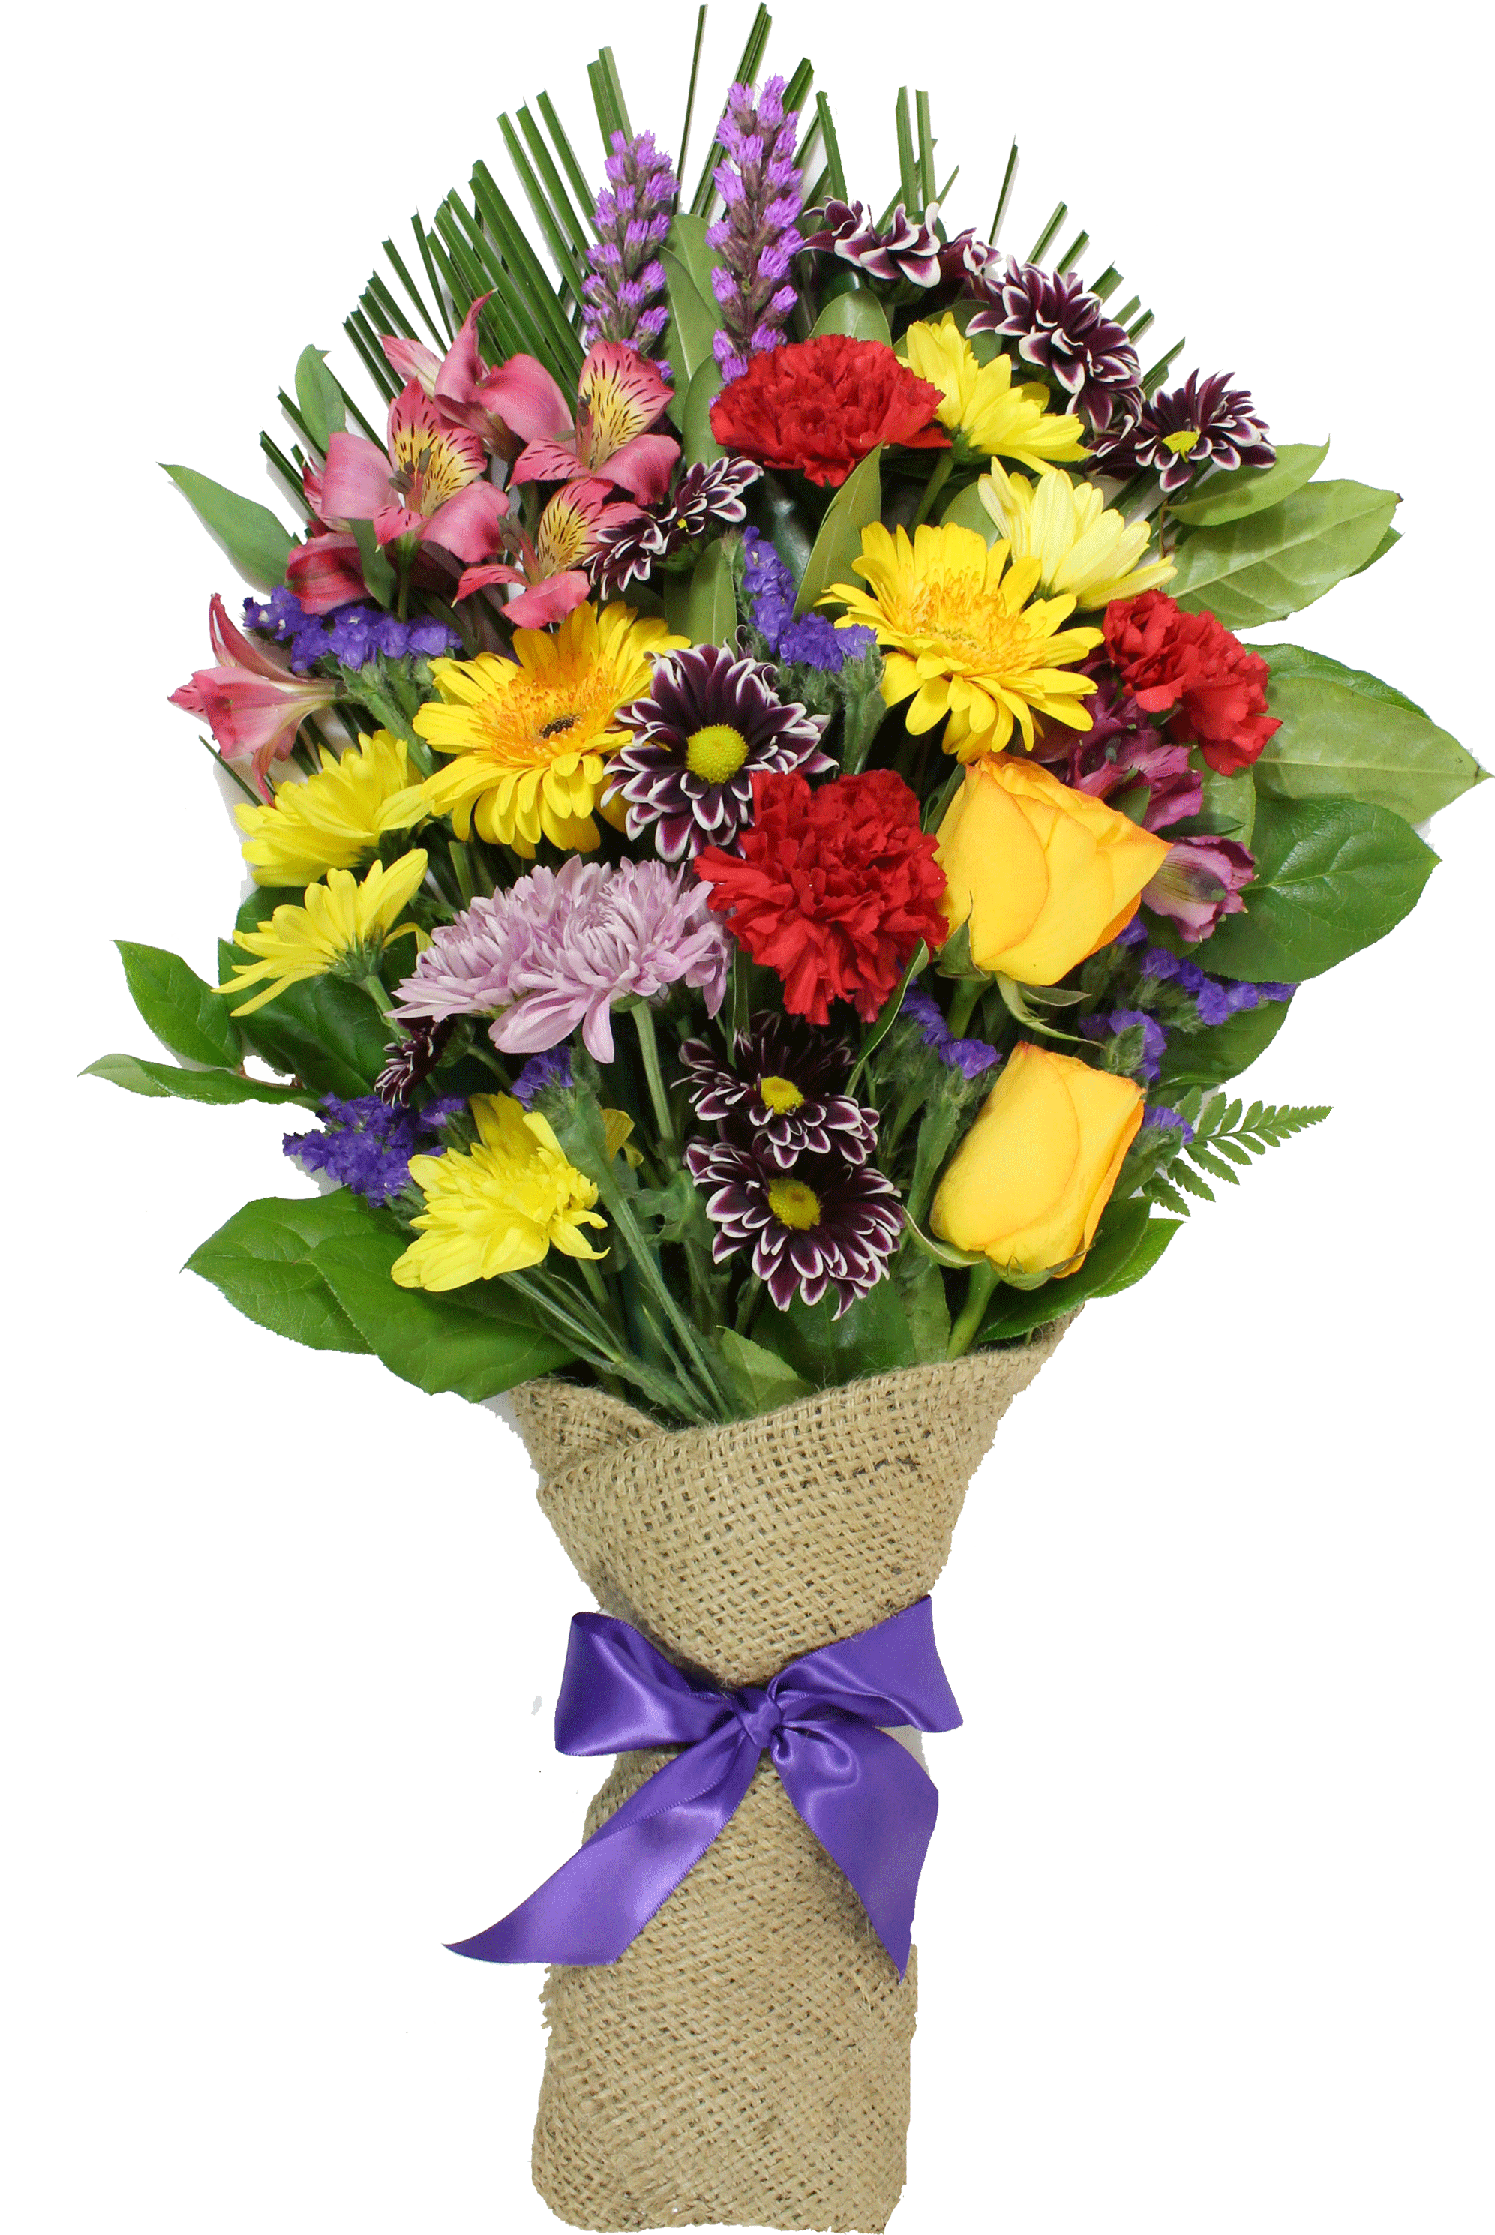 A Bouquet Of Flowers With A Purple Ribbon